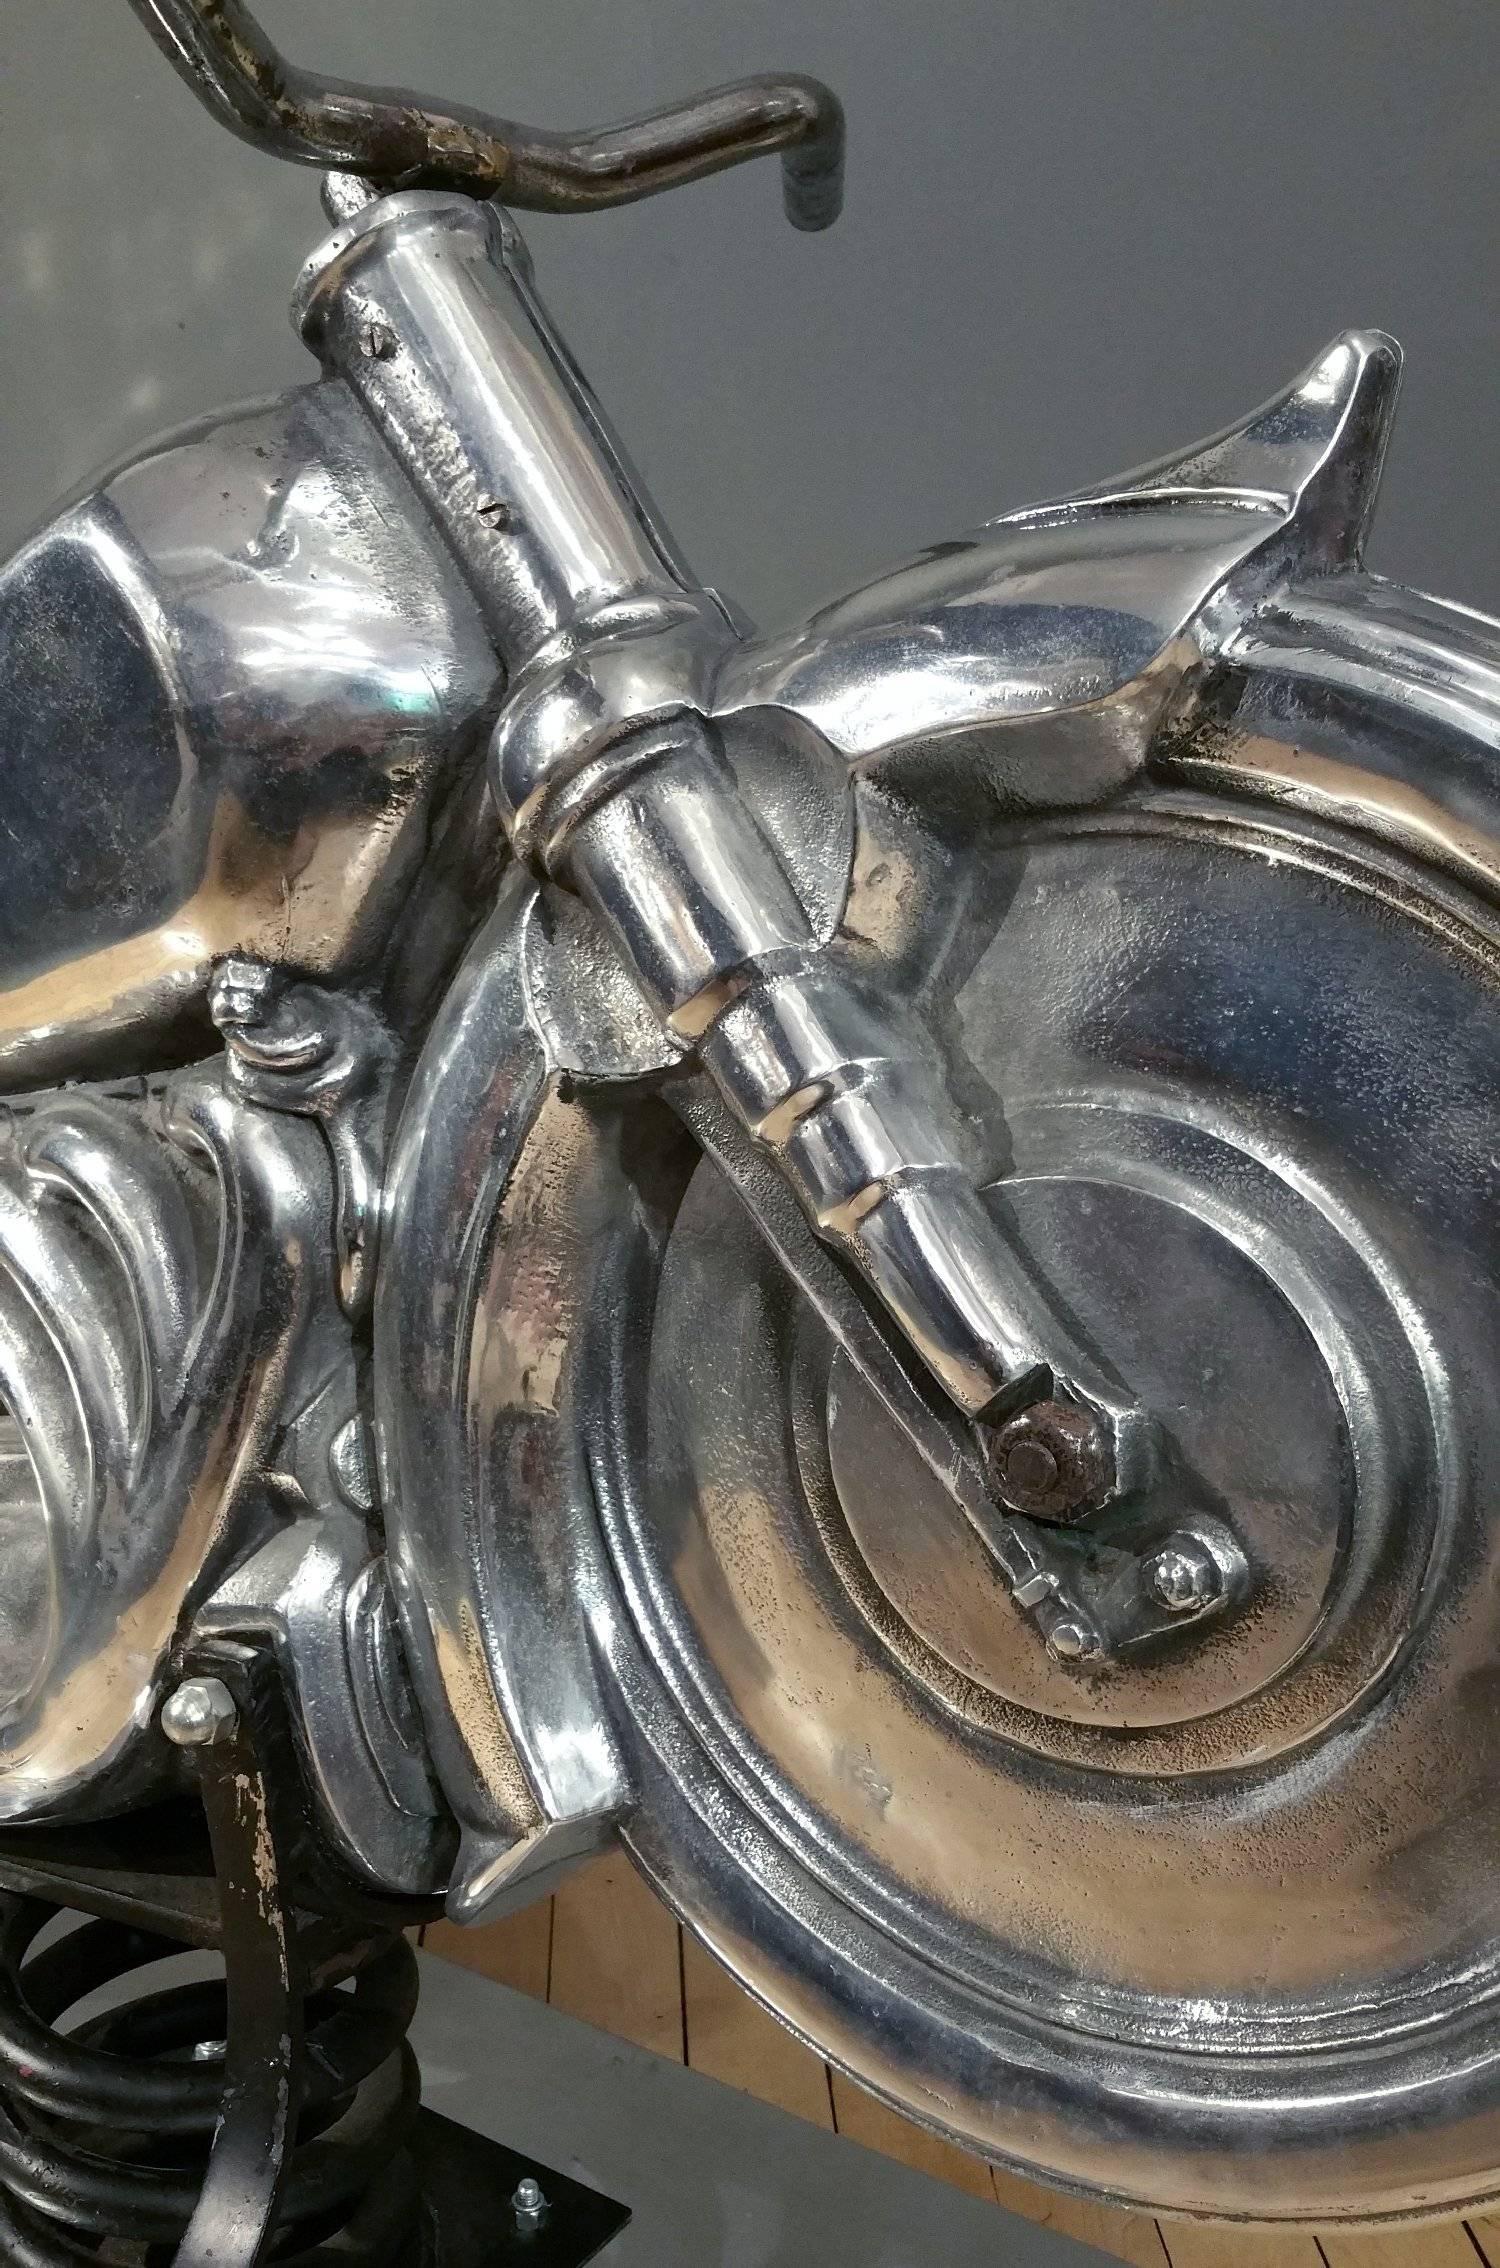 This amazing and rare polished metal miniature toy version Harley Davidson motorcycle is supported on a sturdy metal coil spring support on a polished metal base. This very well designed and high quality motorcycle is perched in an upward poised